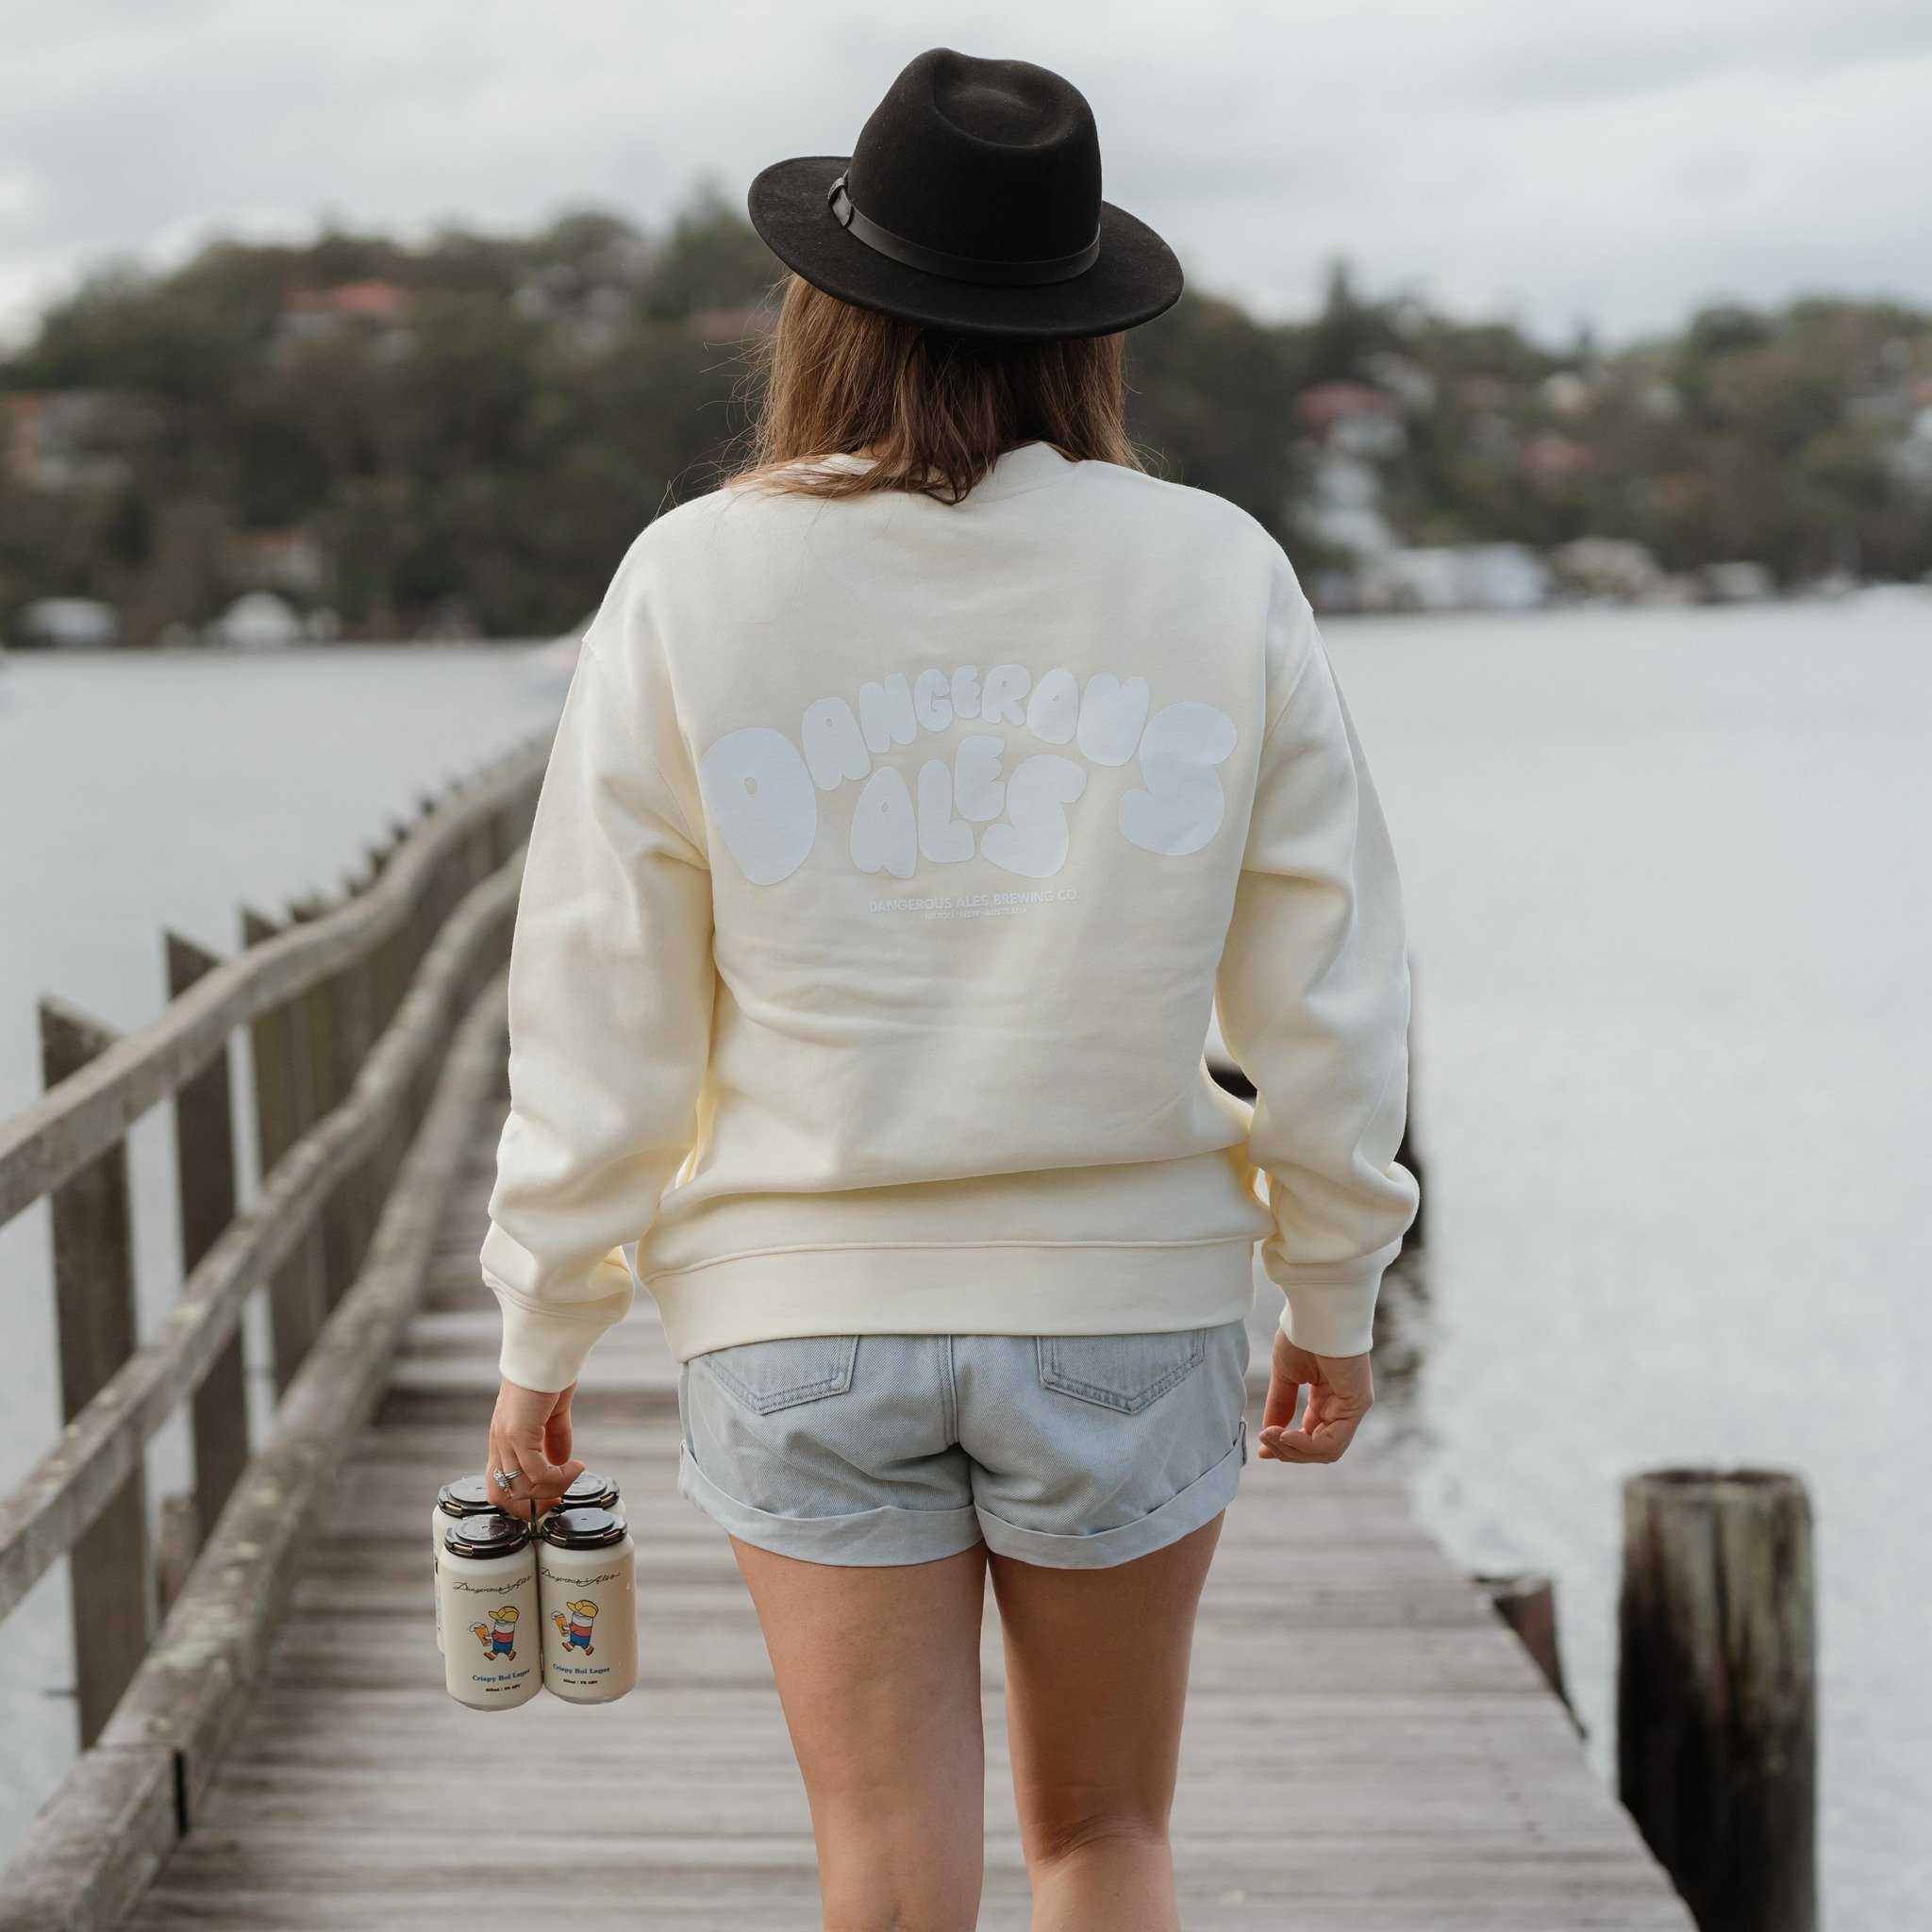 Fresh crews on website now! Available in butter yellow, pine green and black. Limited stock so jump online now and snap one up

#dangerousales #beermerch #beers #beer #brewery #australianbrewery #indiebeer #craftbeer